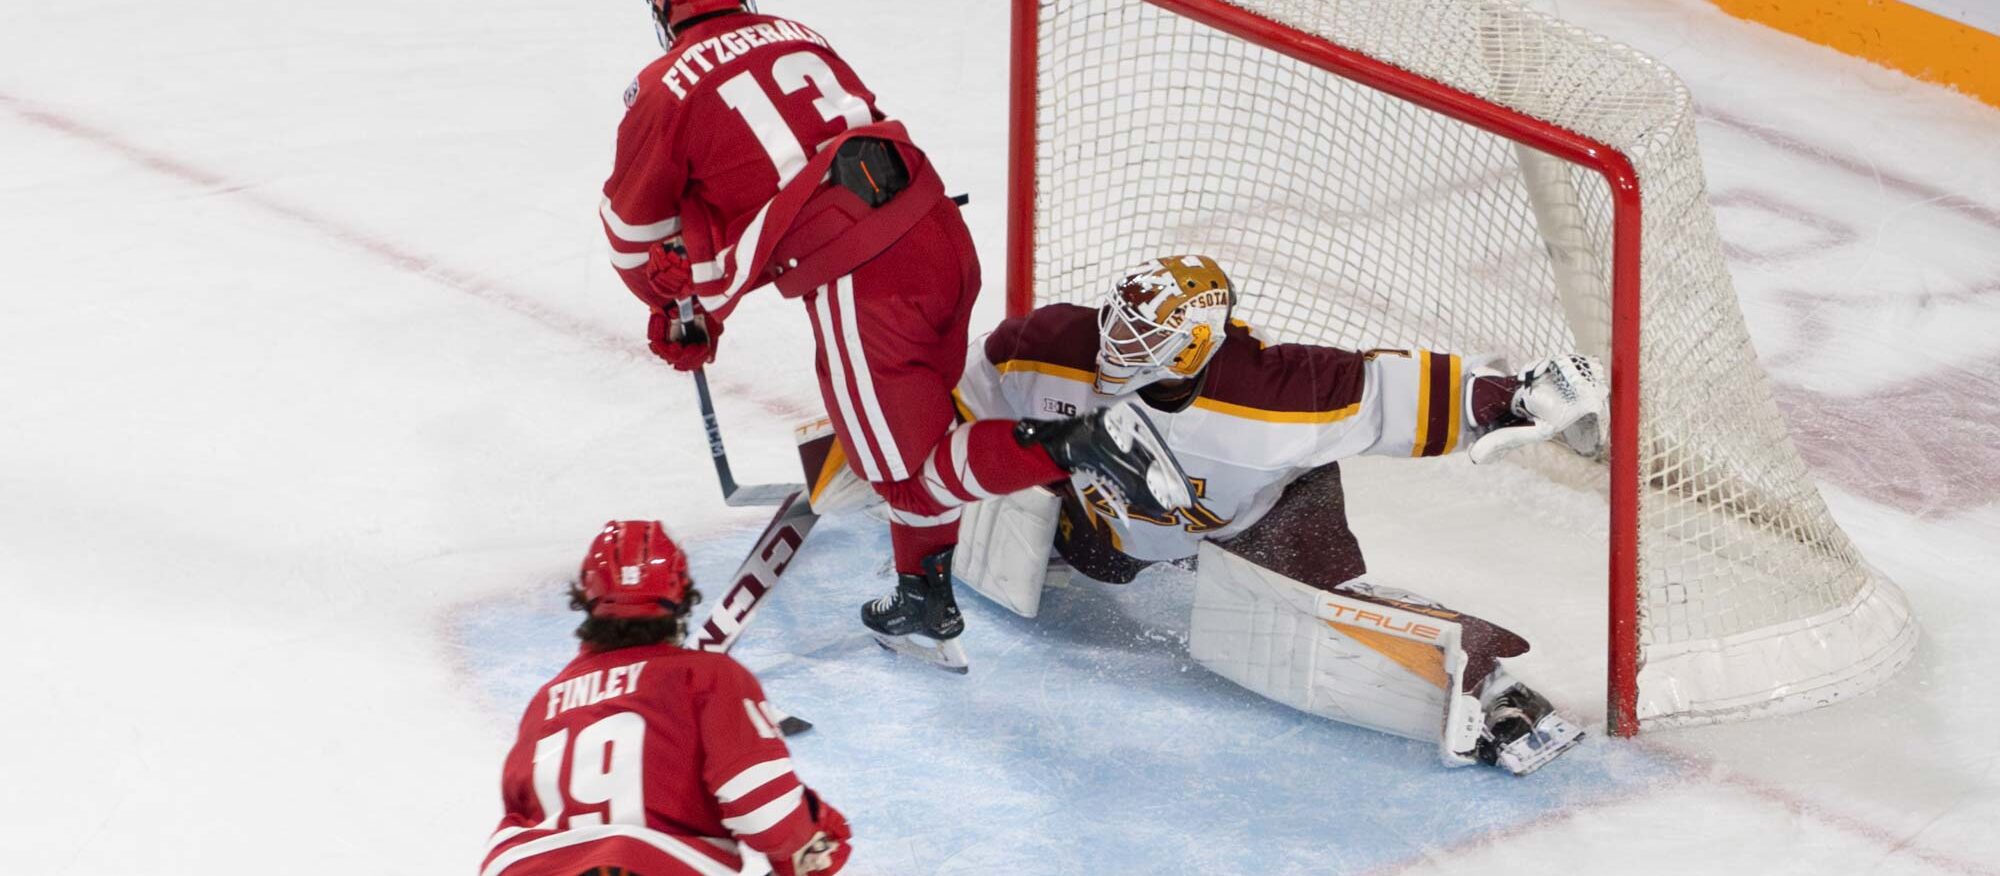 Justen Close makes a big save to keep the Gophers in the game.